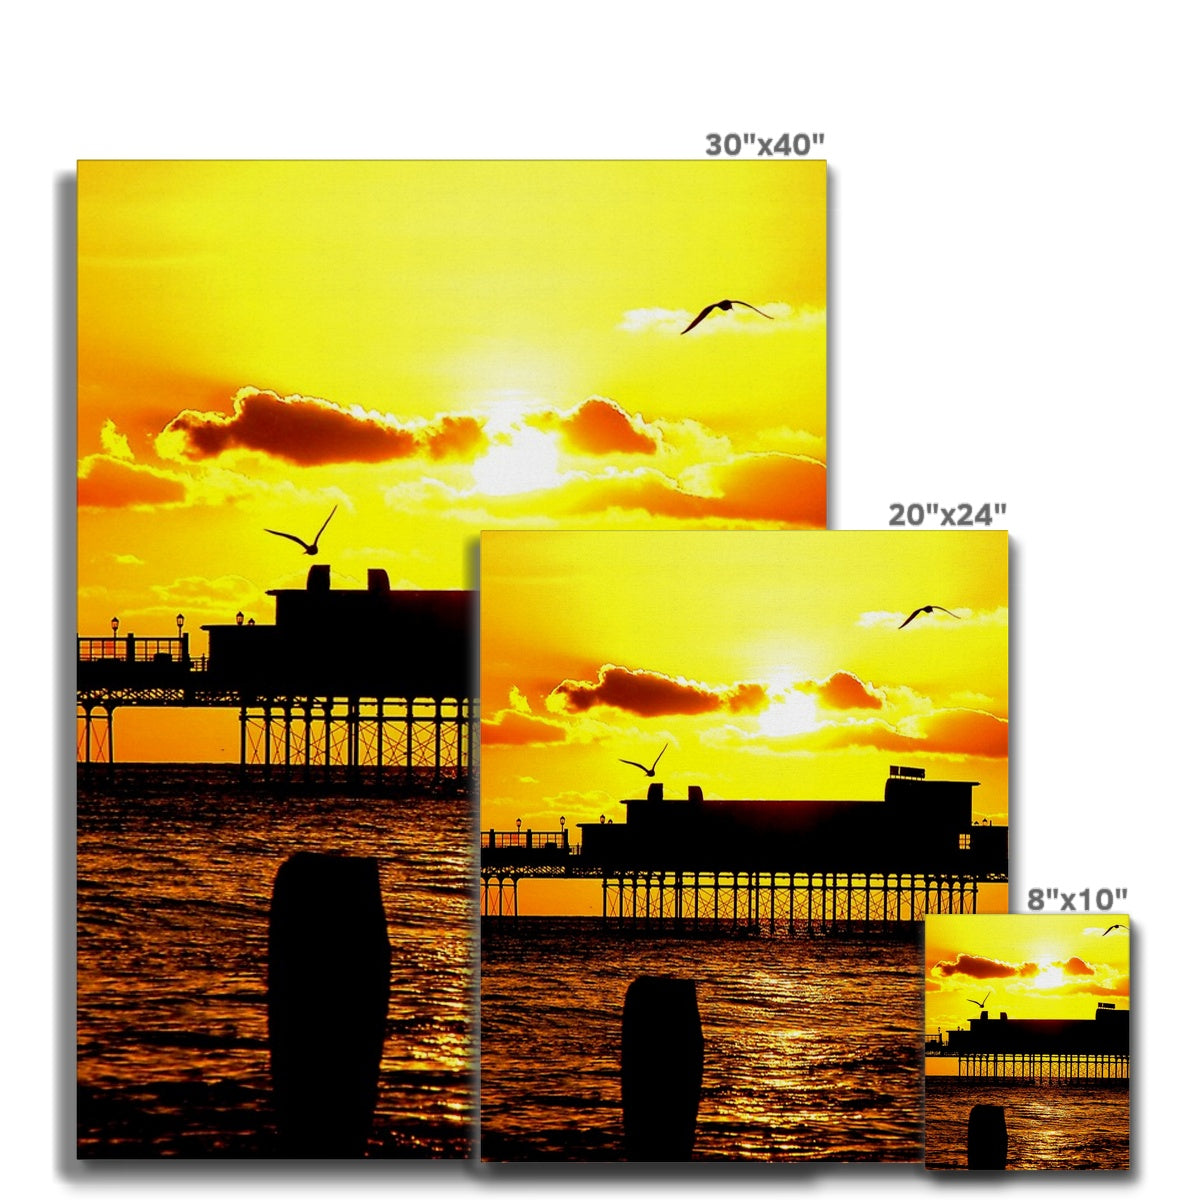 Worthing Pier Perfect Sunset by David Sawyer Canvas